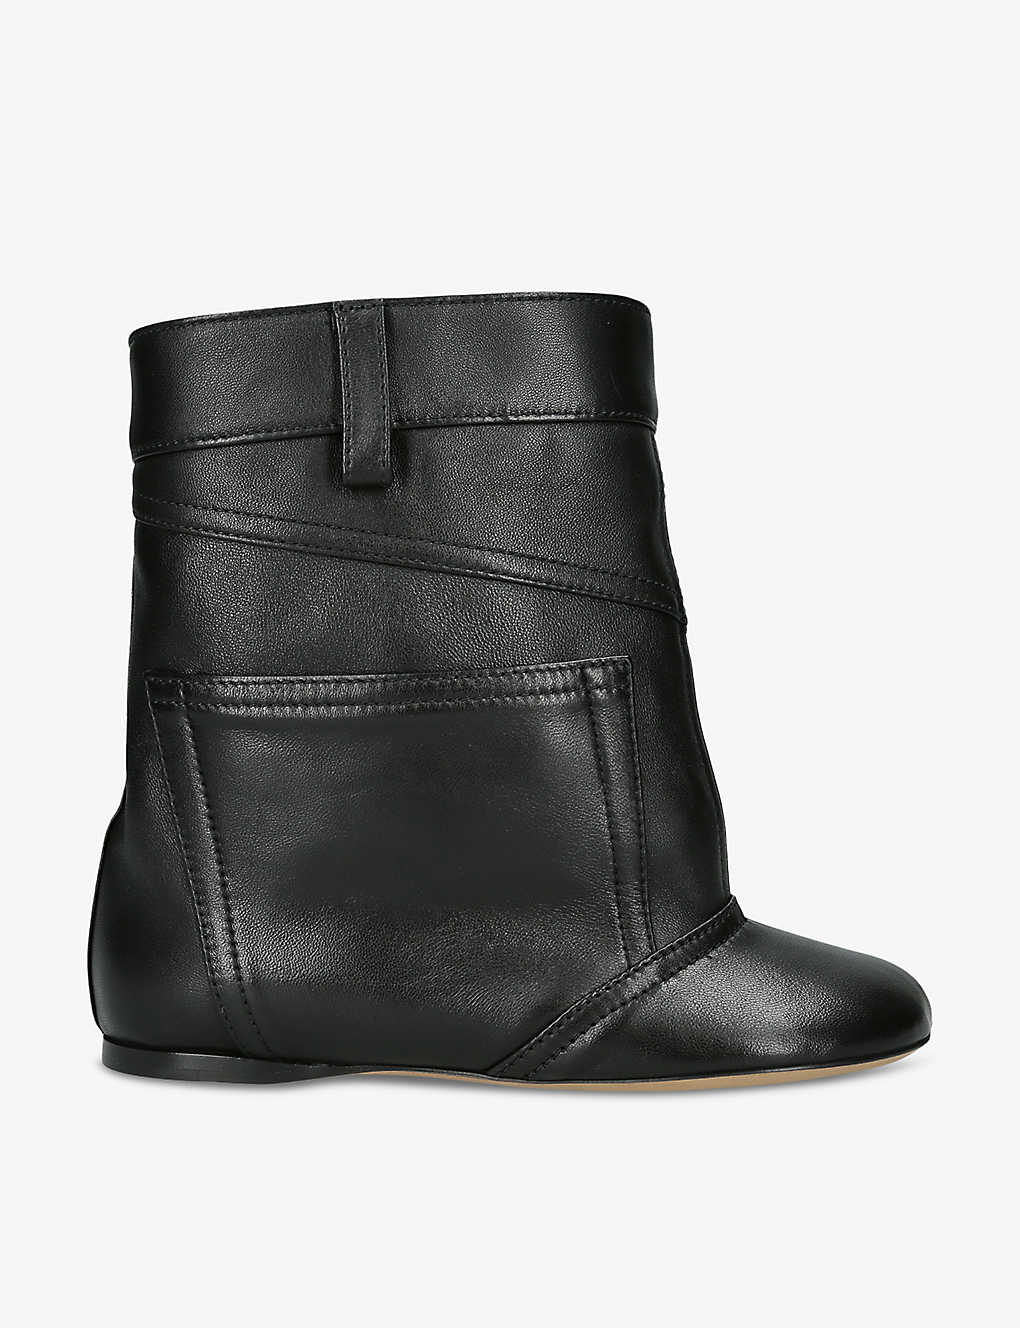 LOEWE TOY TROUSER-DESIGN LEATHER ANKLE BOOTS